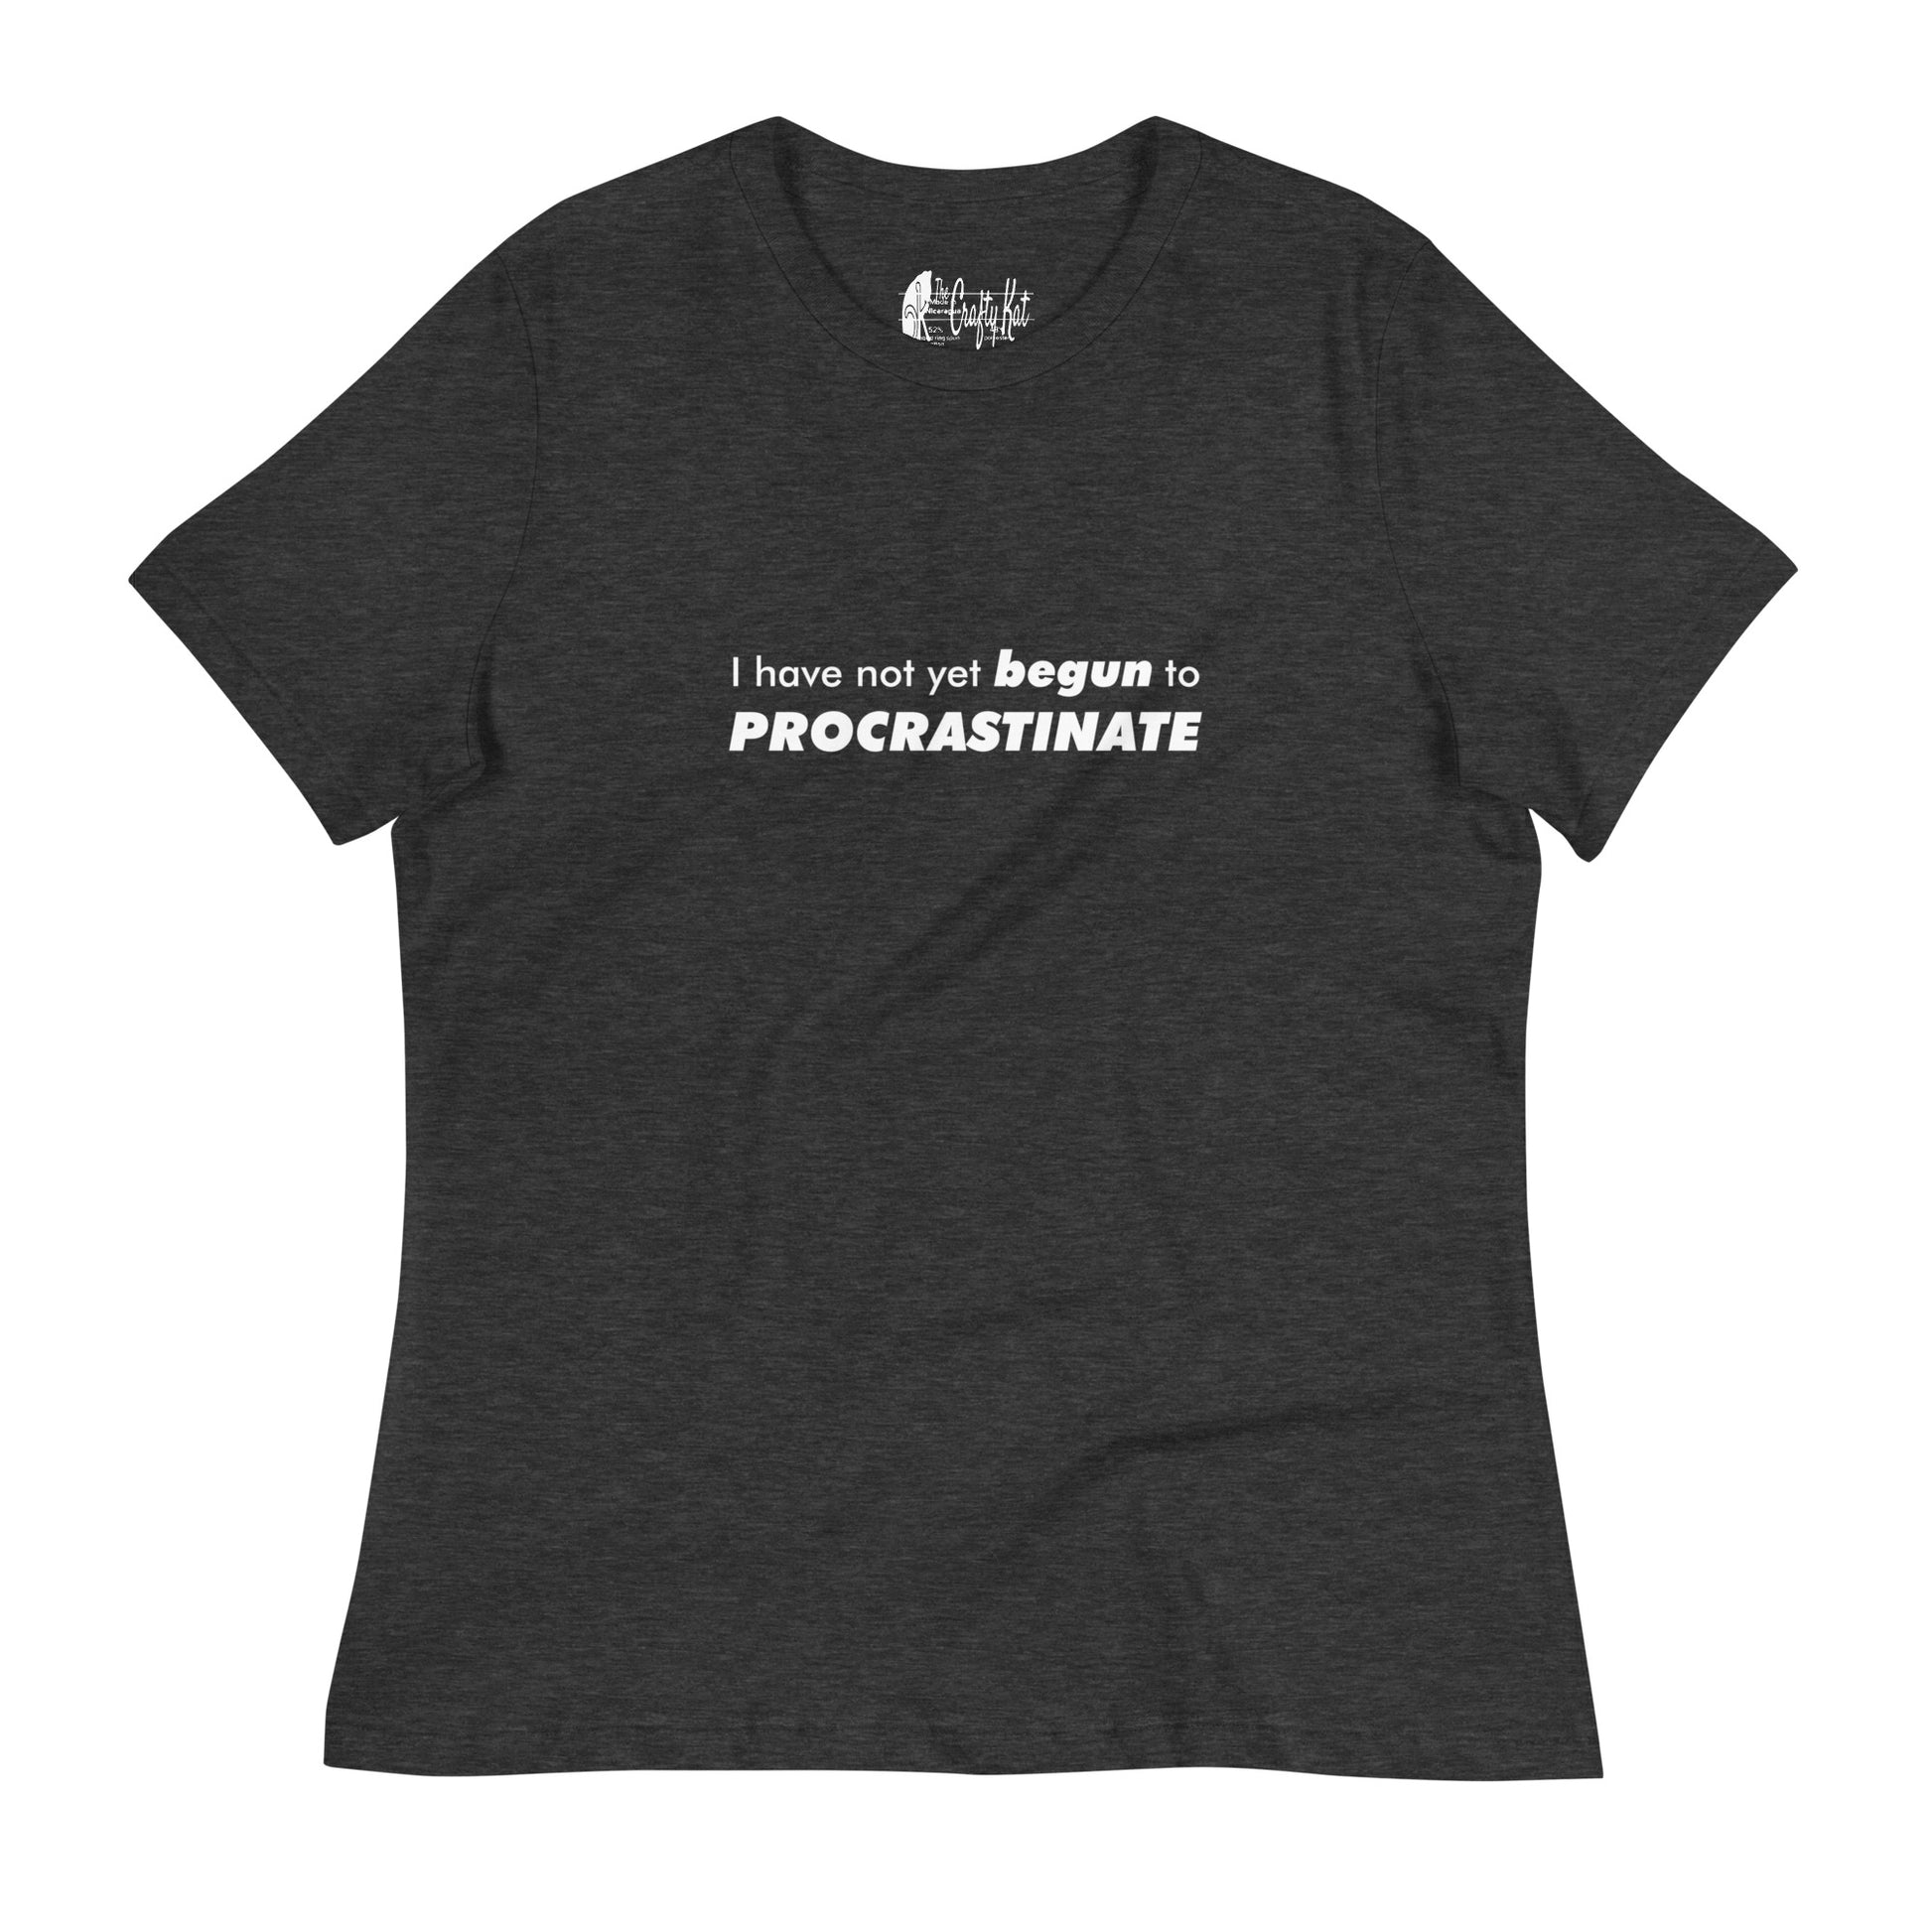 Dark Grey Heather women's relaxed-fit t-shirt with text graphic: "I have not yet BEGUN to PROCRASTINATE"